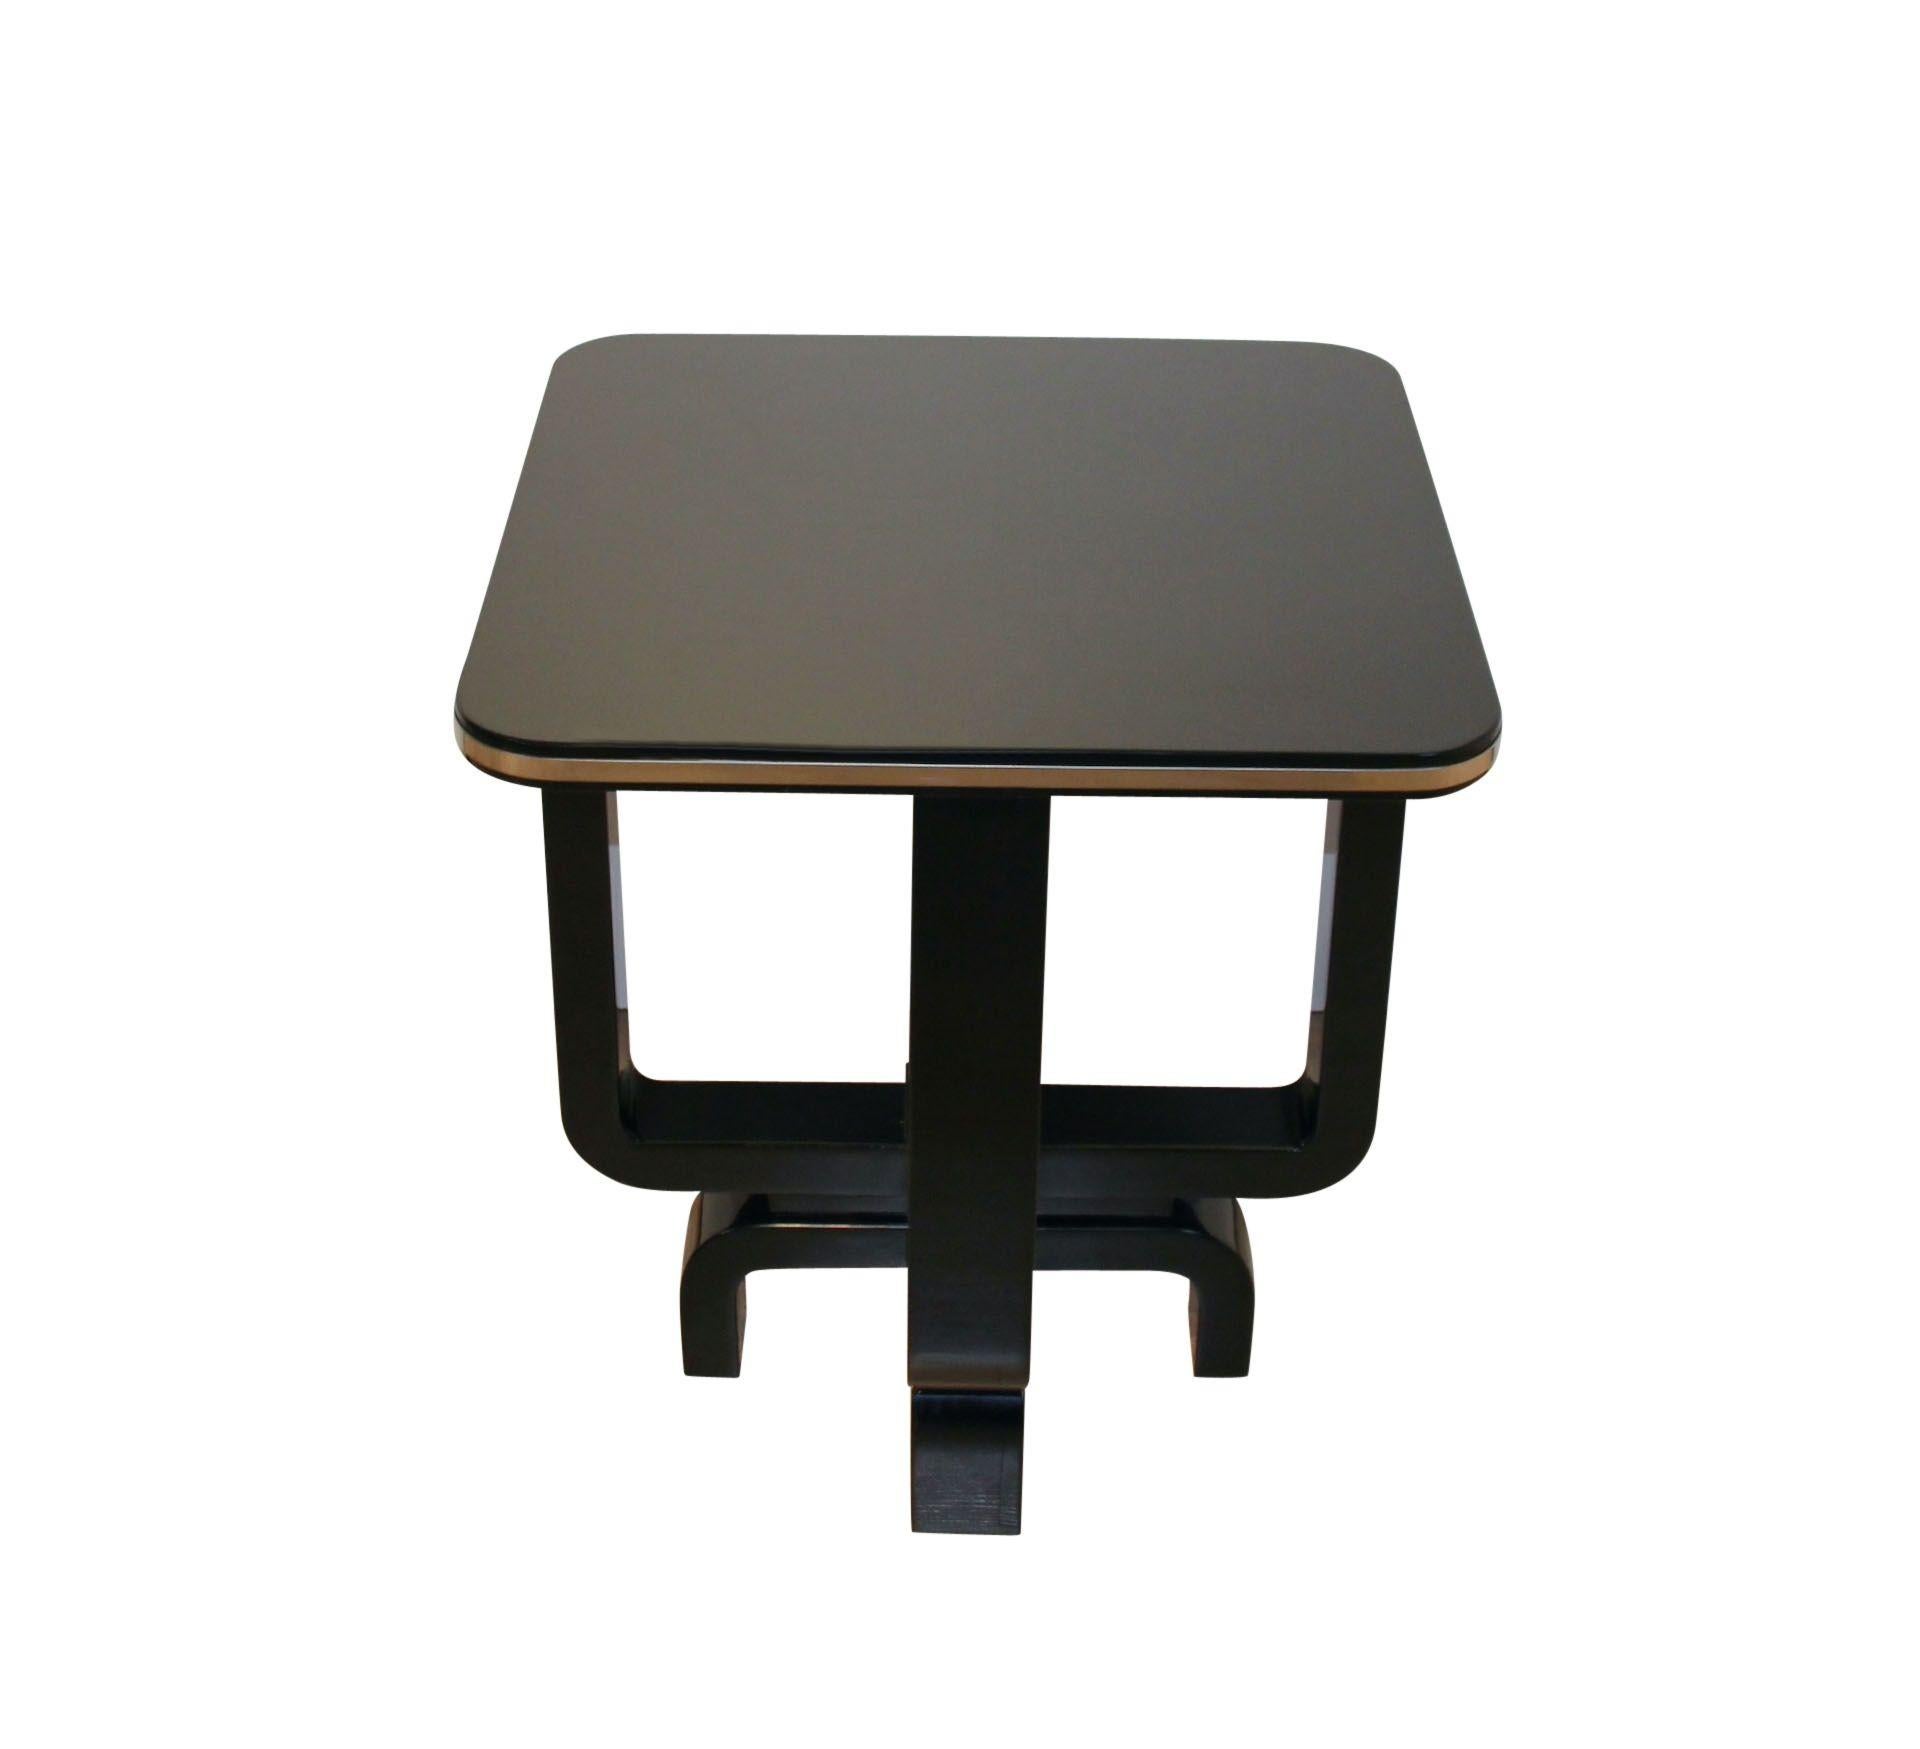 Four-legged Art Deco side table, black lacquer and metal, 
 
Rectangular four-legged Art Deco side table from France around 1930.
Black high gloss piano finish on hardwood. Stainless steel trim around the edge of the plate.
 
Dimensions: H 61.5